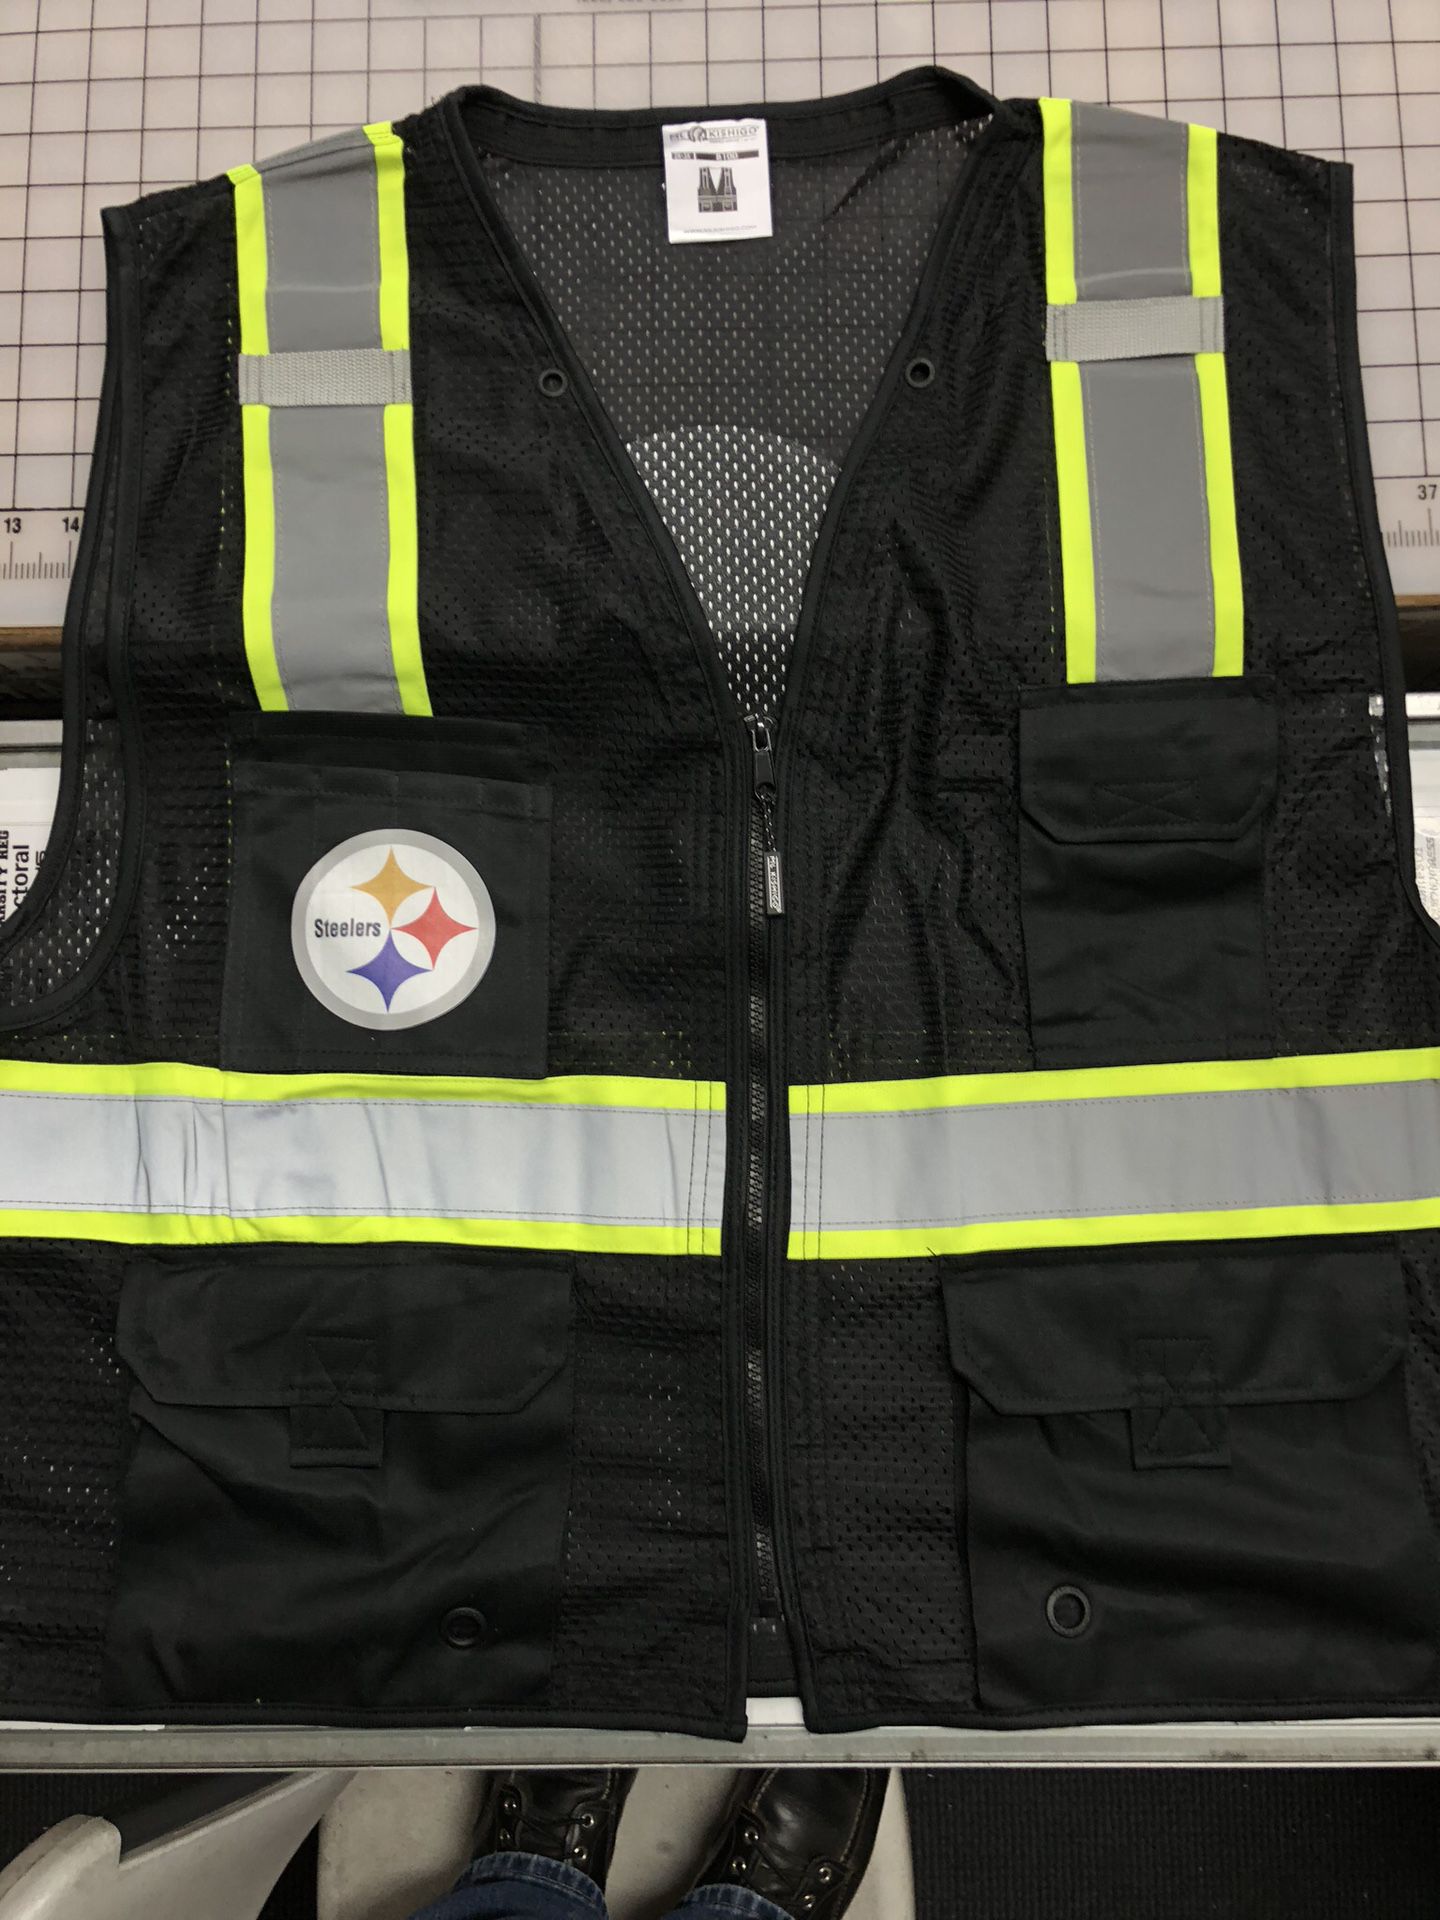 Pittsburgh steelers safety vest ozforex group annual report